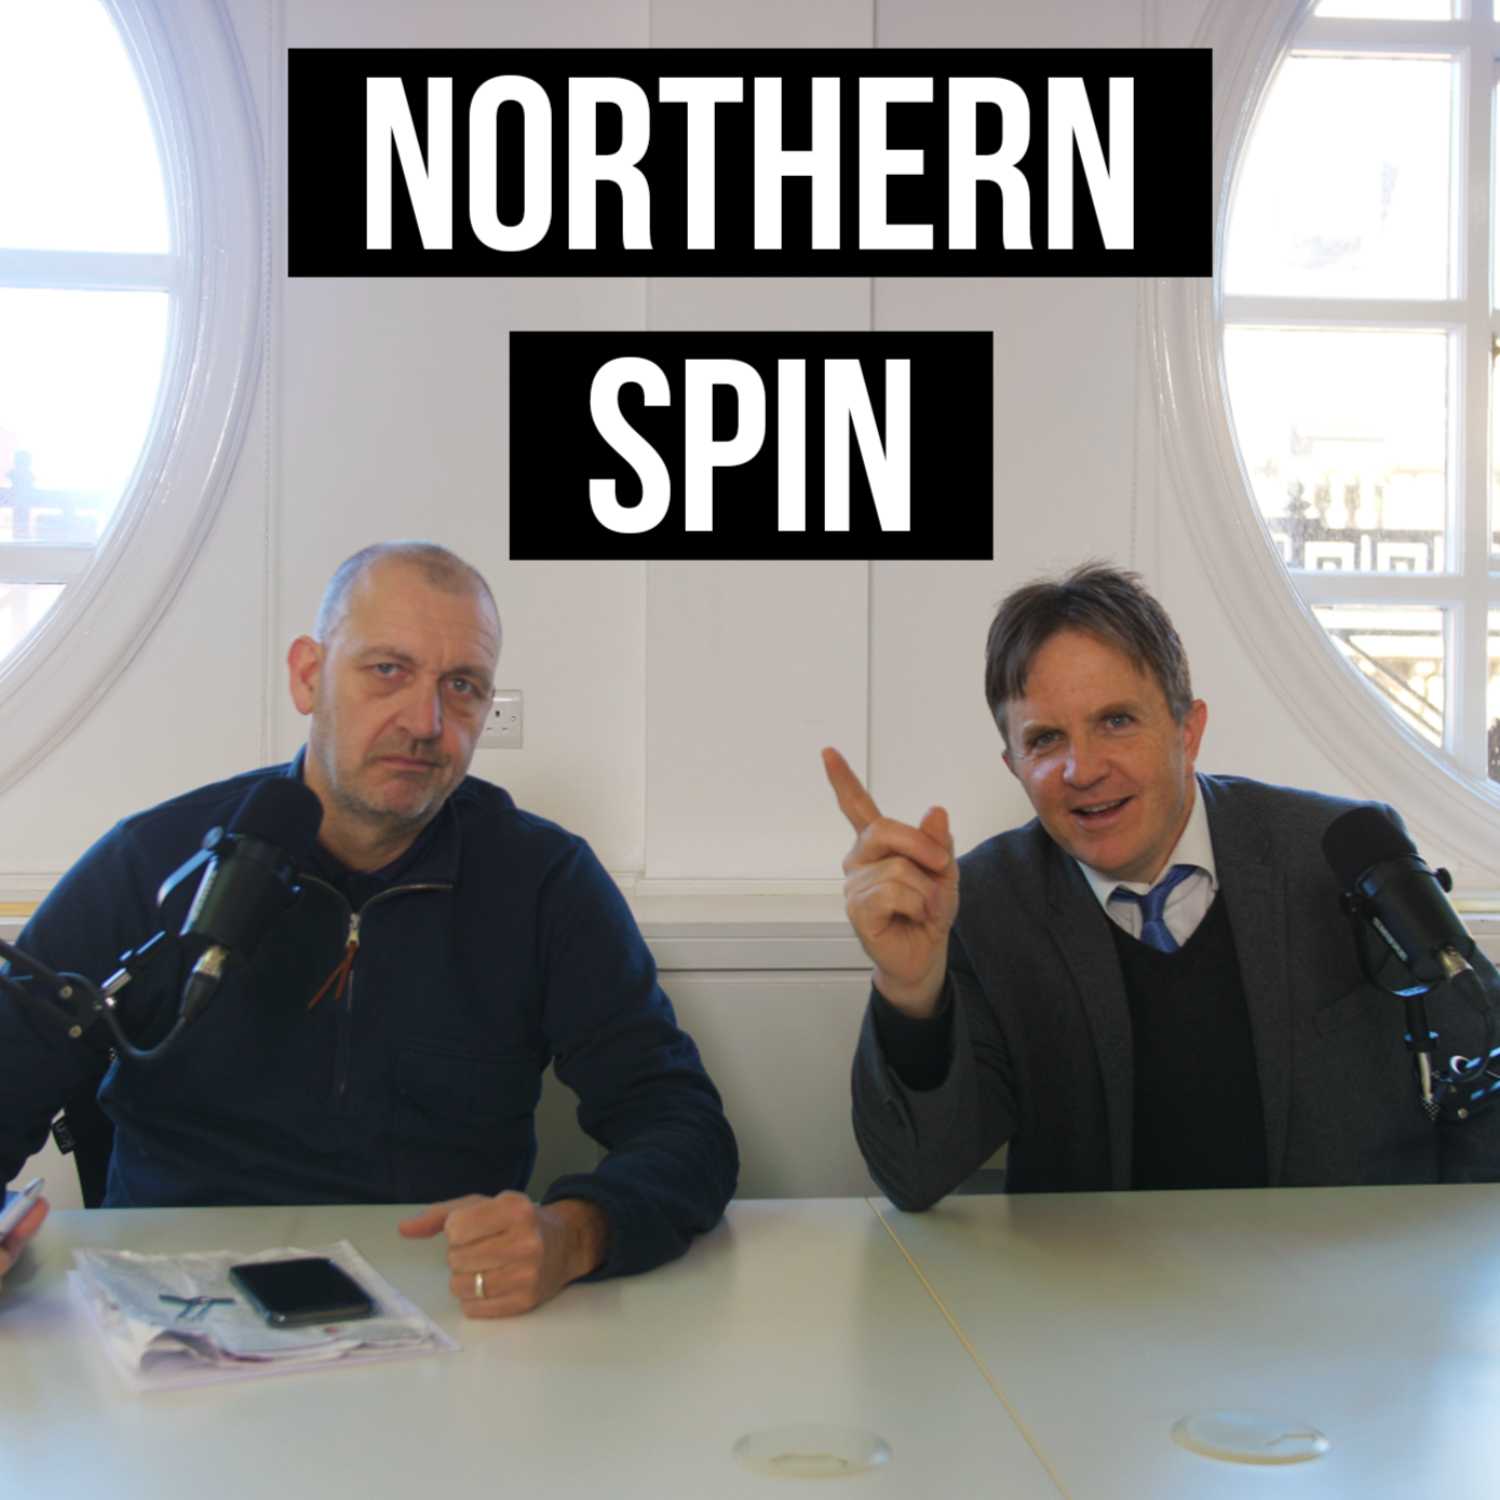 Northern Spin - Season 5 - Episode 2: What Does 'Off the Record' Really Mean?